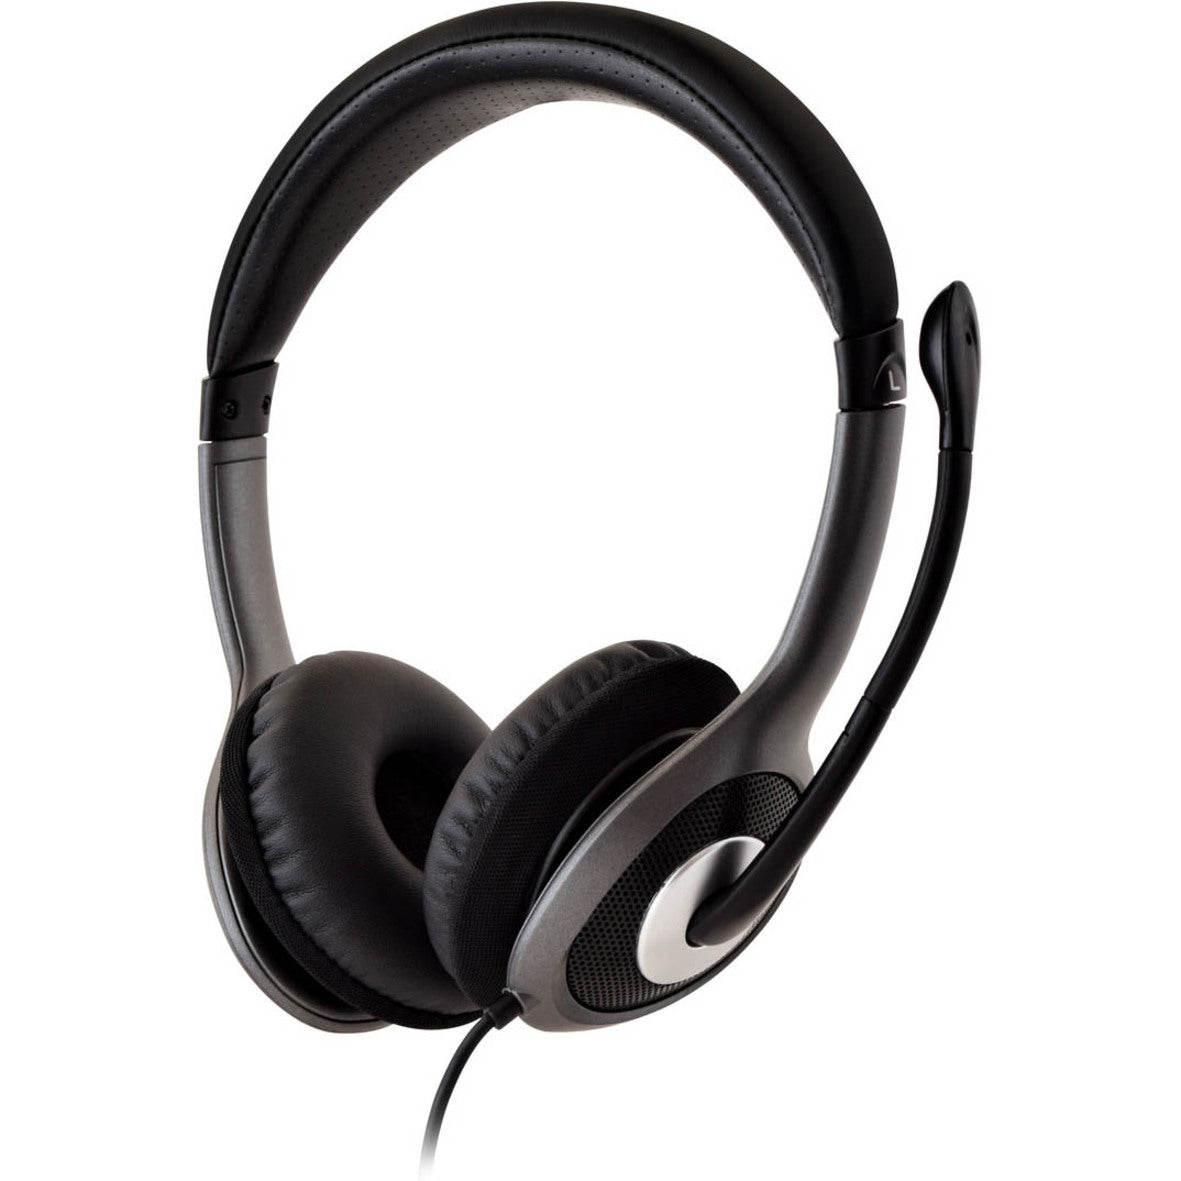 V7 HU521-2NP Deluxe USB Stereo Headphones with Microphone, Over-the-head, Noise Cancelling, 2 Year Warranty